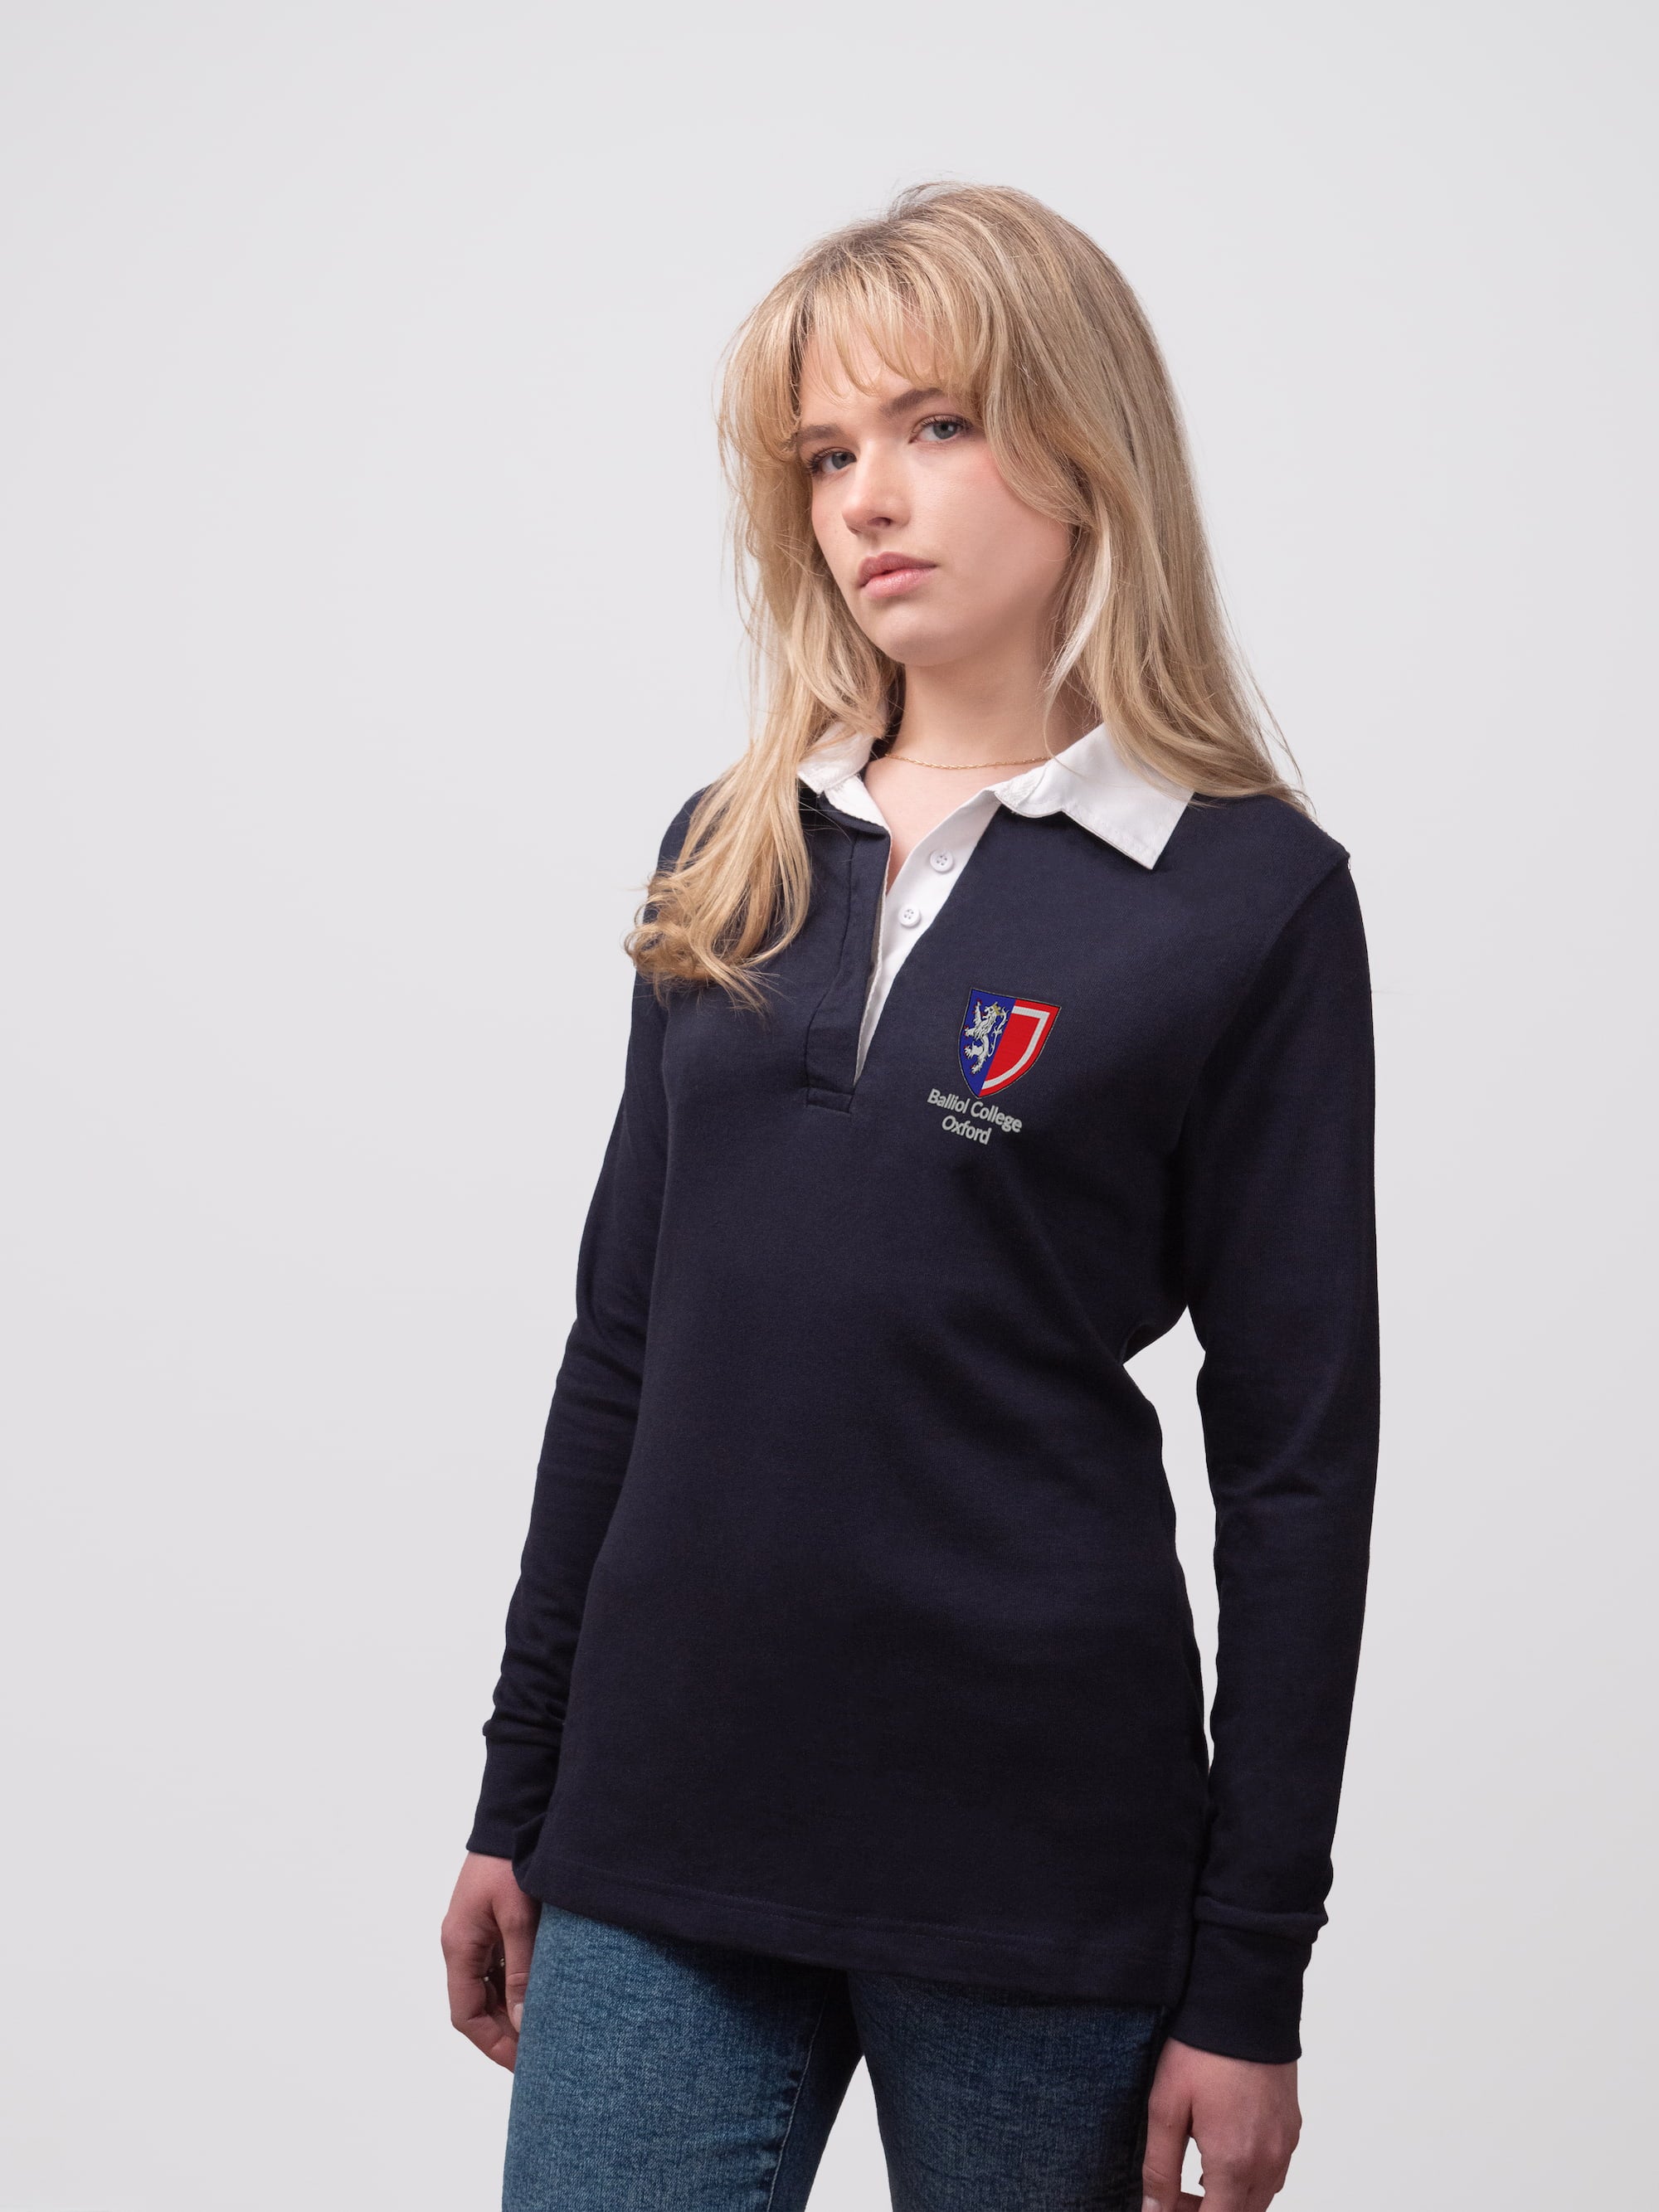 Student wearing a navy Balliol College rugby shirt with embroidered crest